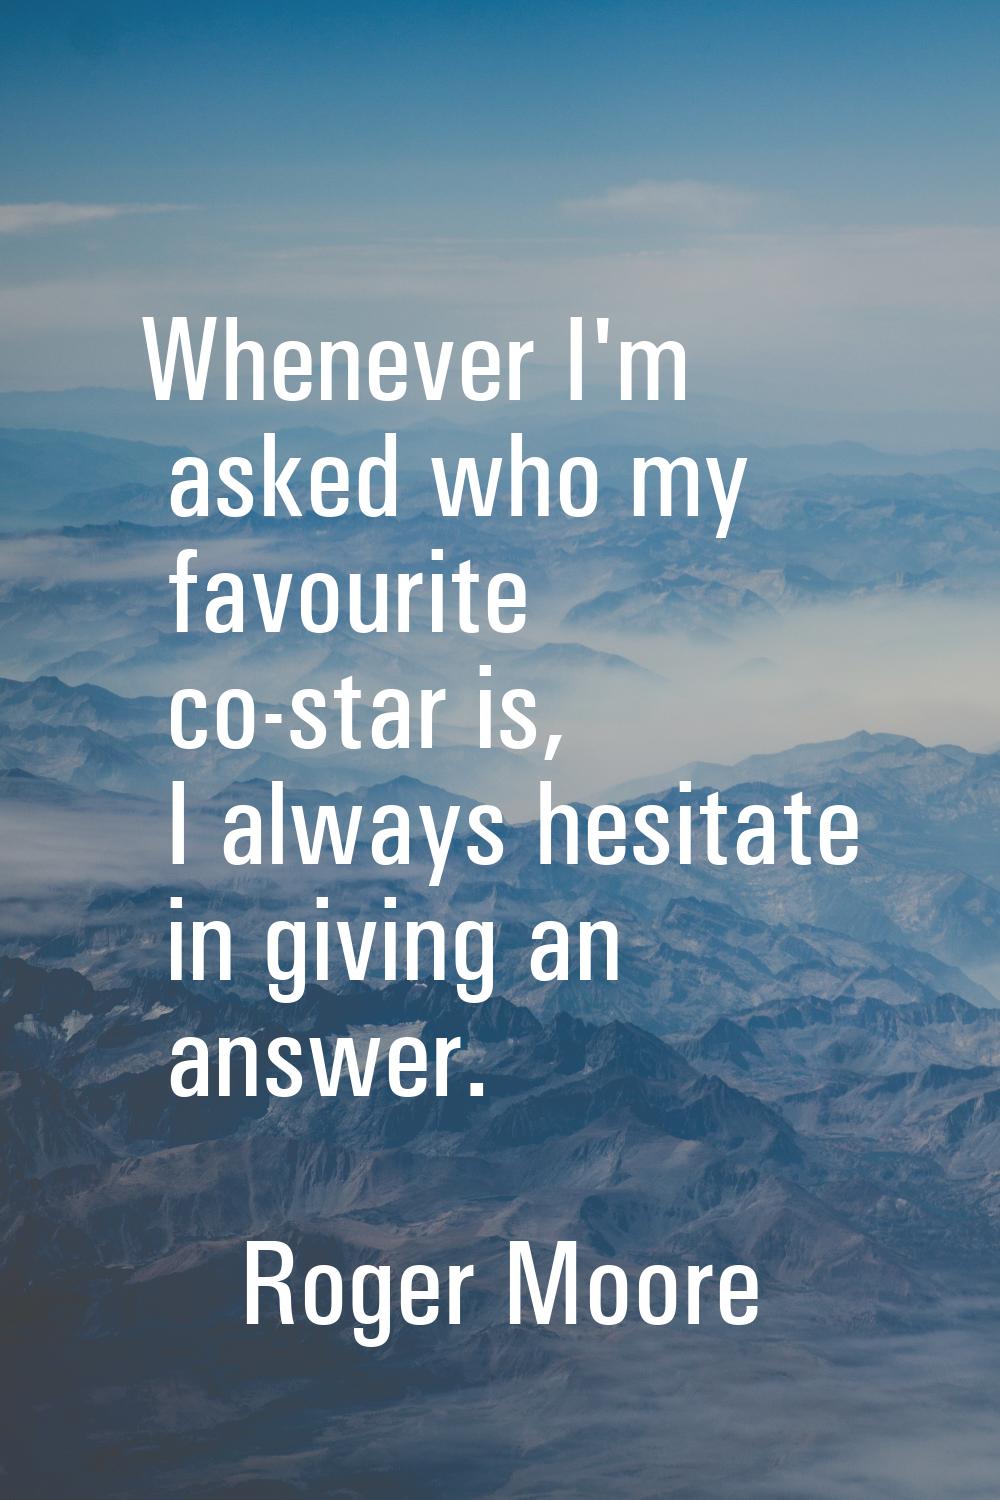 Whenever I'm asked who my favourite co-star is, I always hesitate in giving an answer.